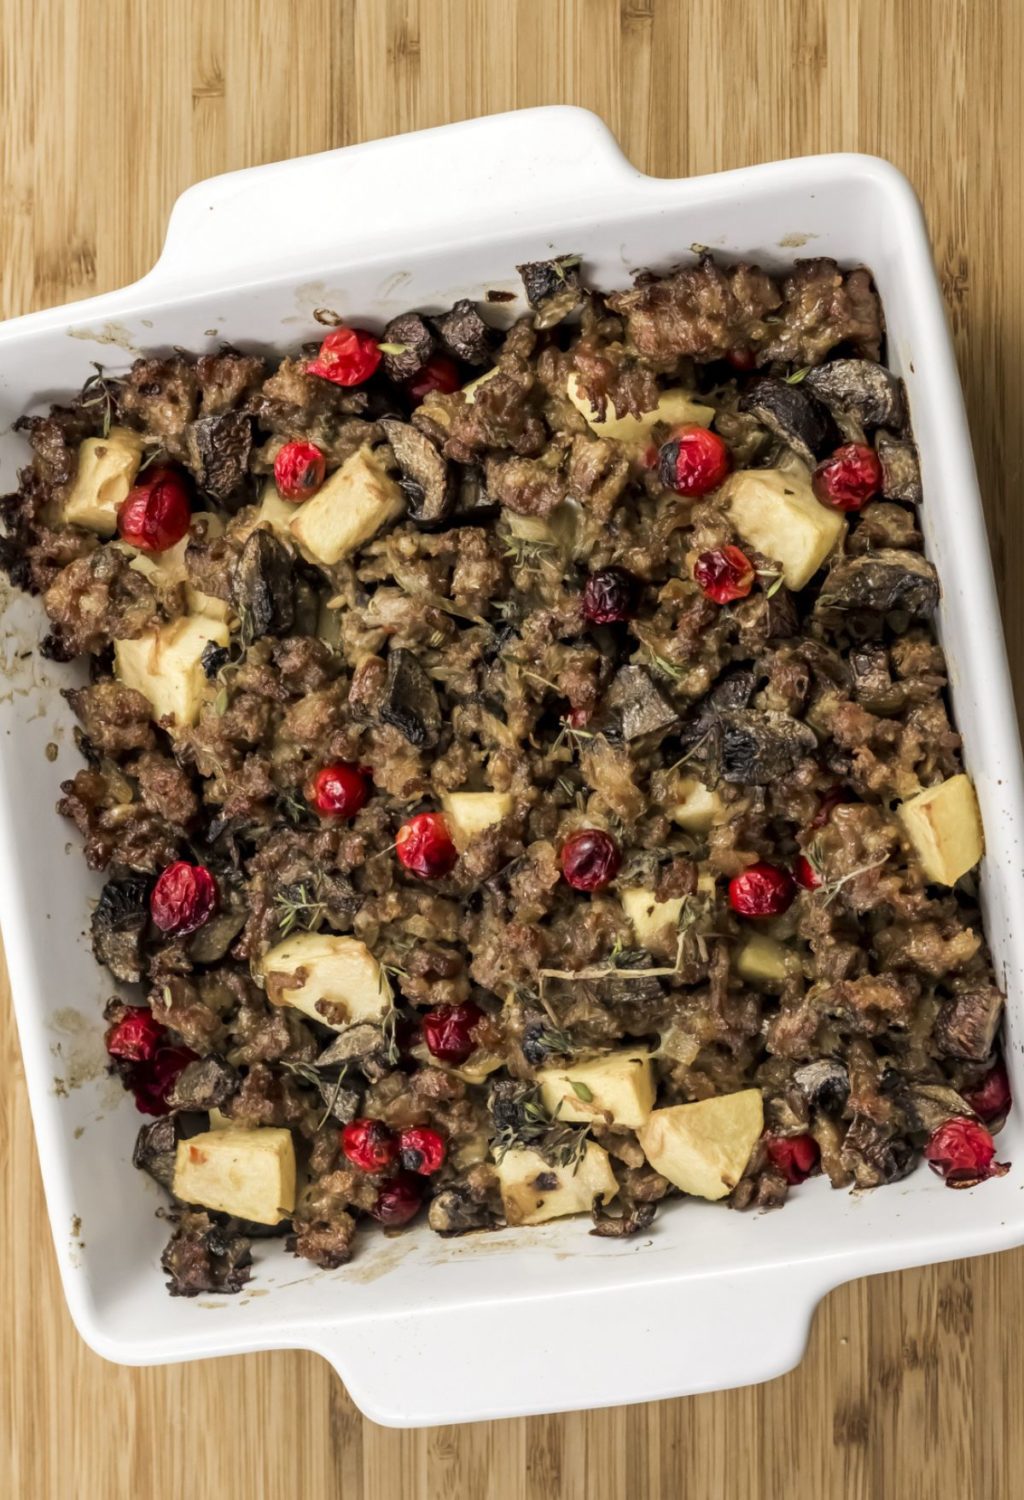 A casserole dish filled with mushrooms and cranberries.